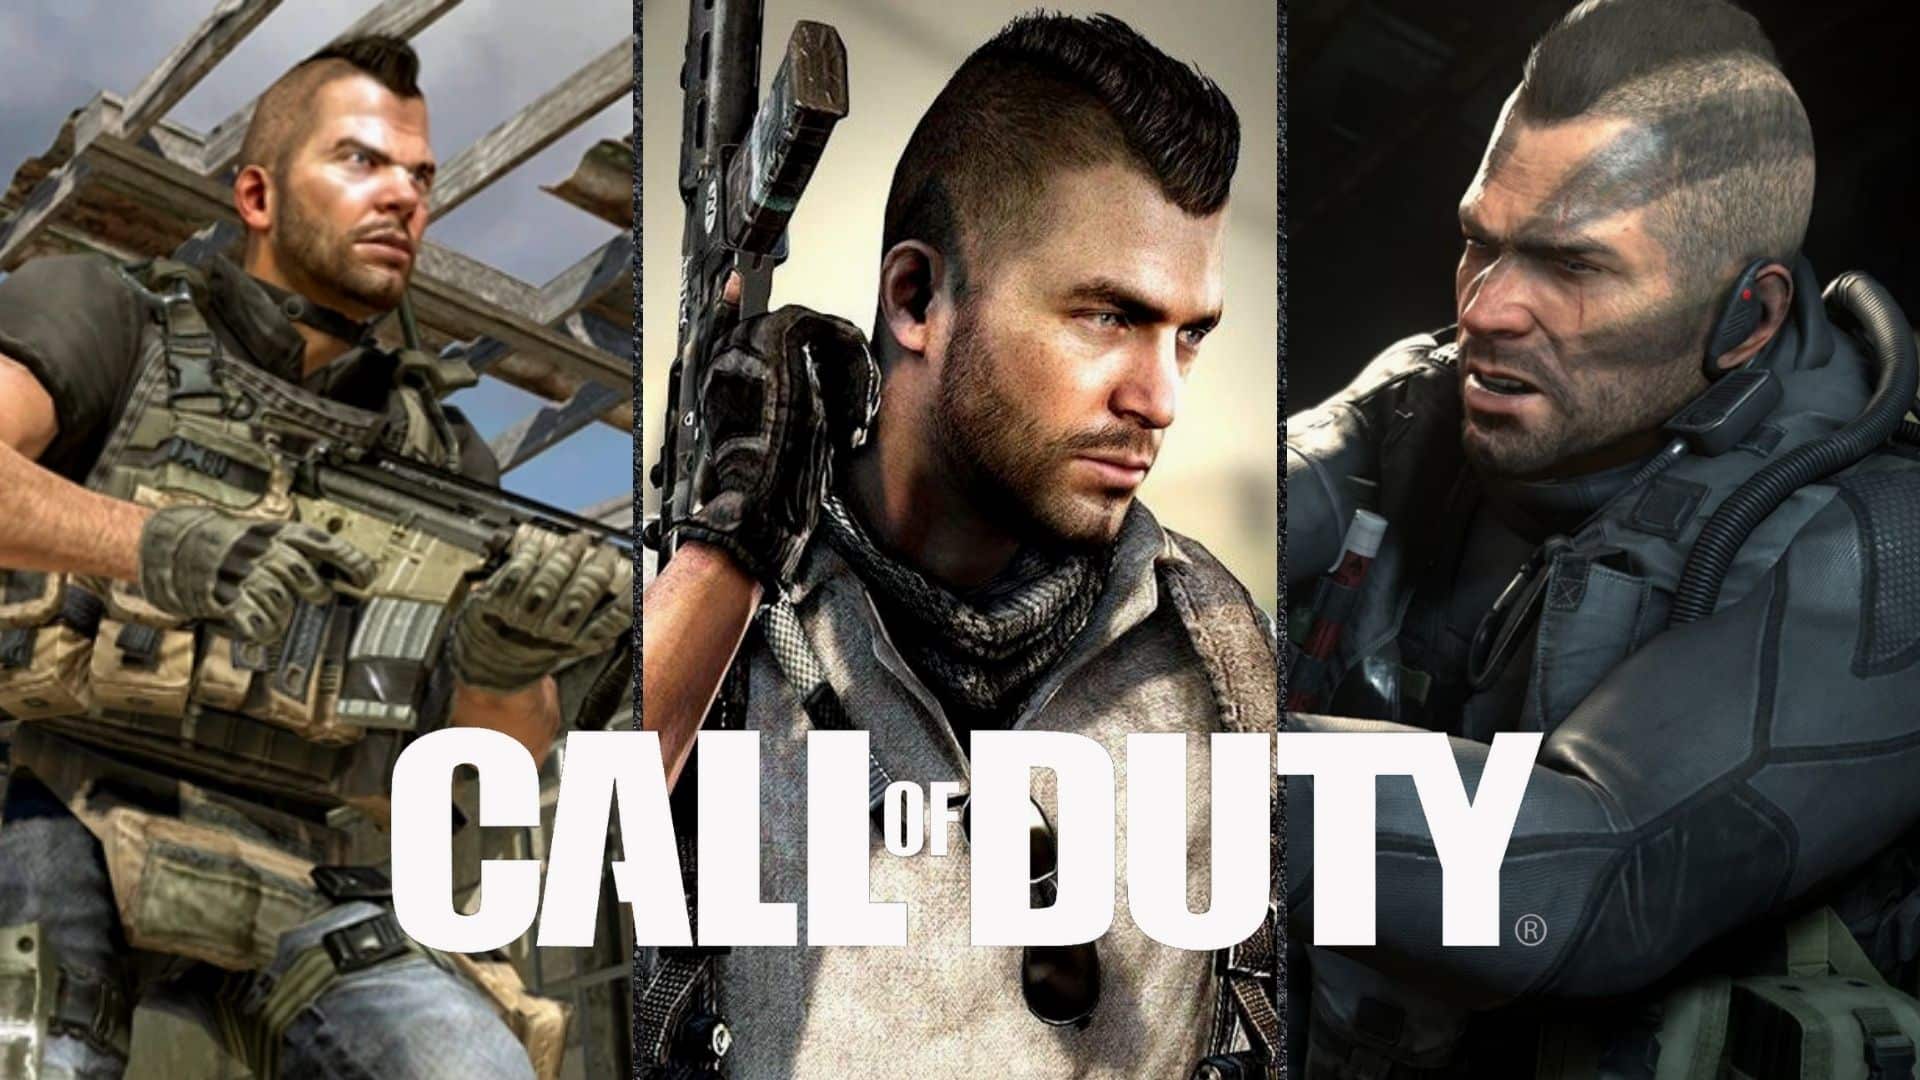 Call of Duty 4: Modern Warfare  Best Video Games of ALL-TIME